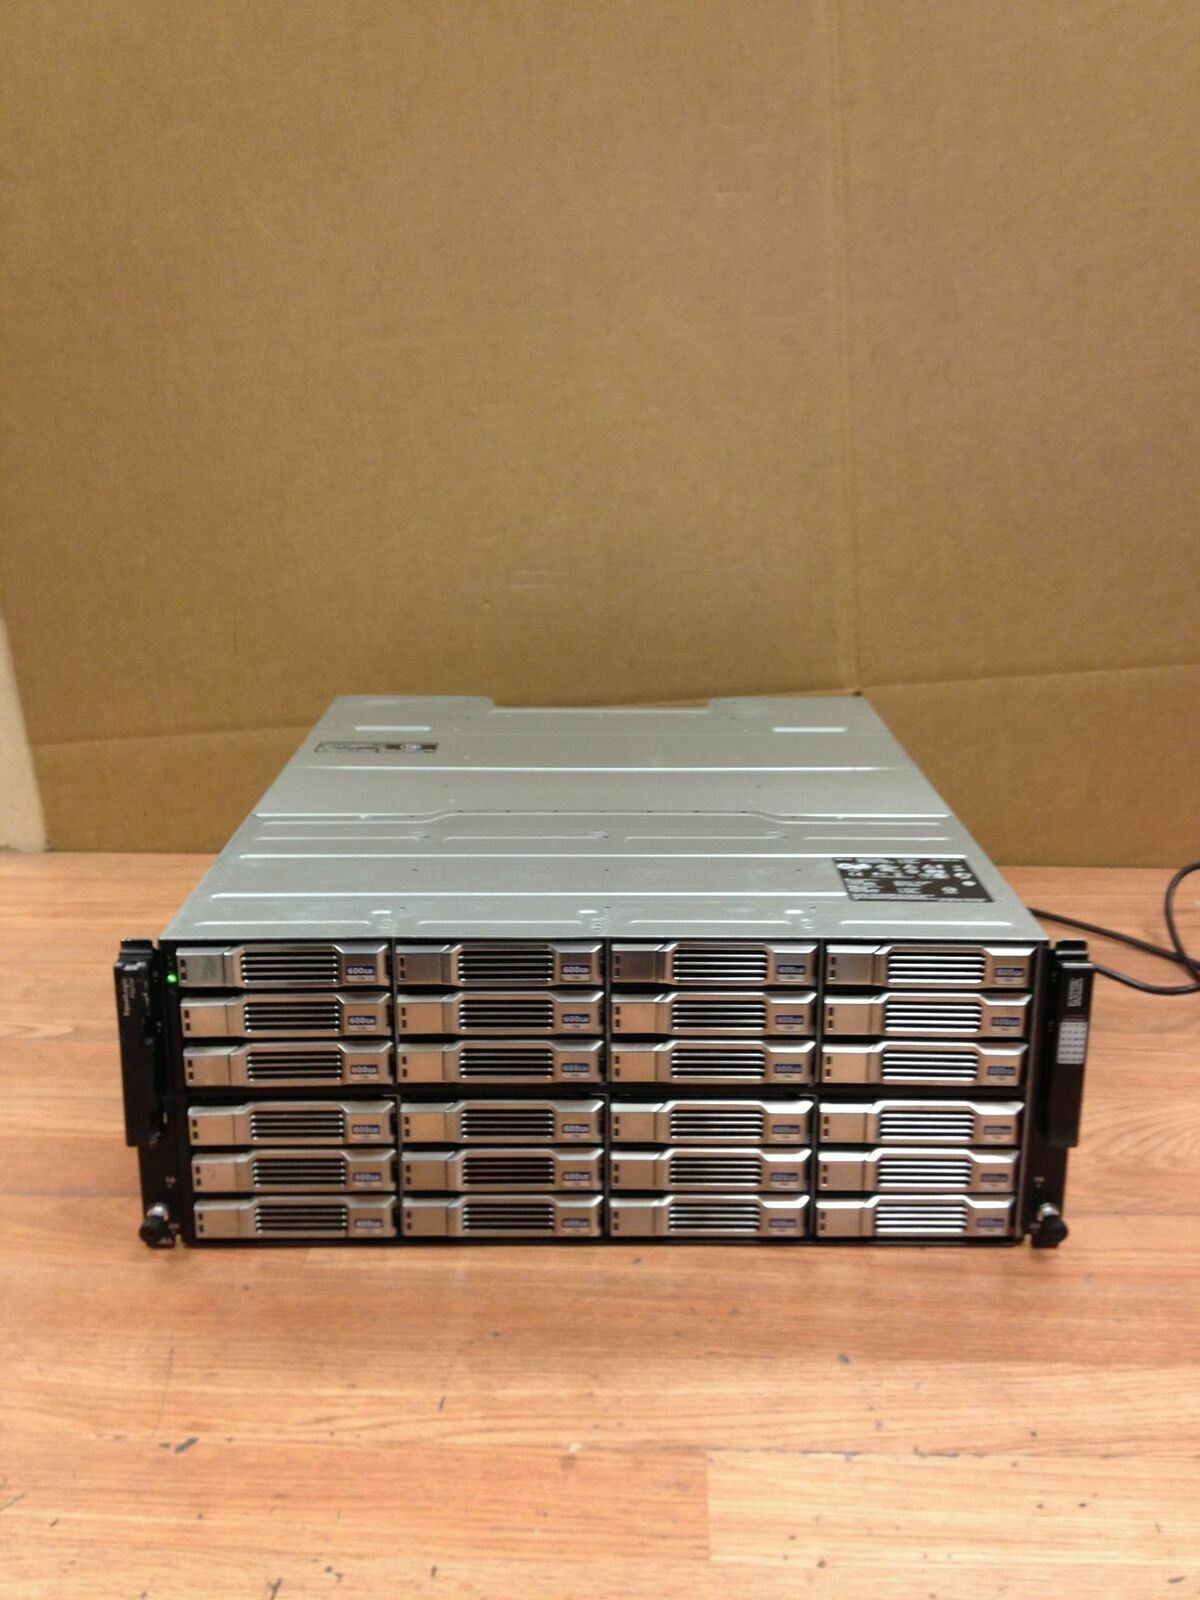 Dell Equallogic PS6110 ISCSI SAN Storage with 24 Caddies + 2x Control Module 14